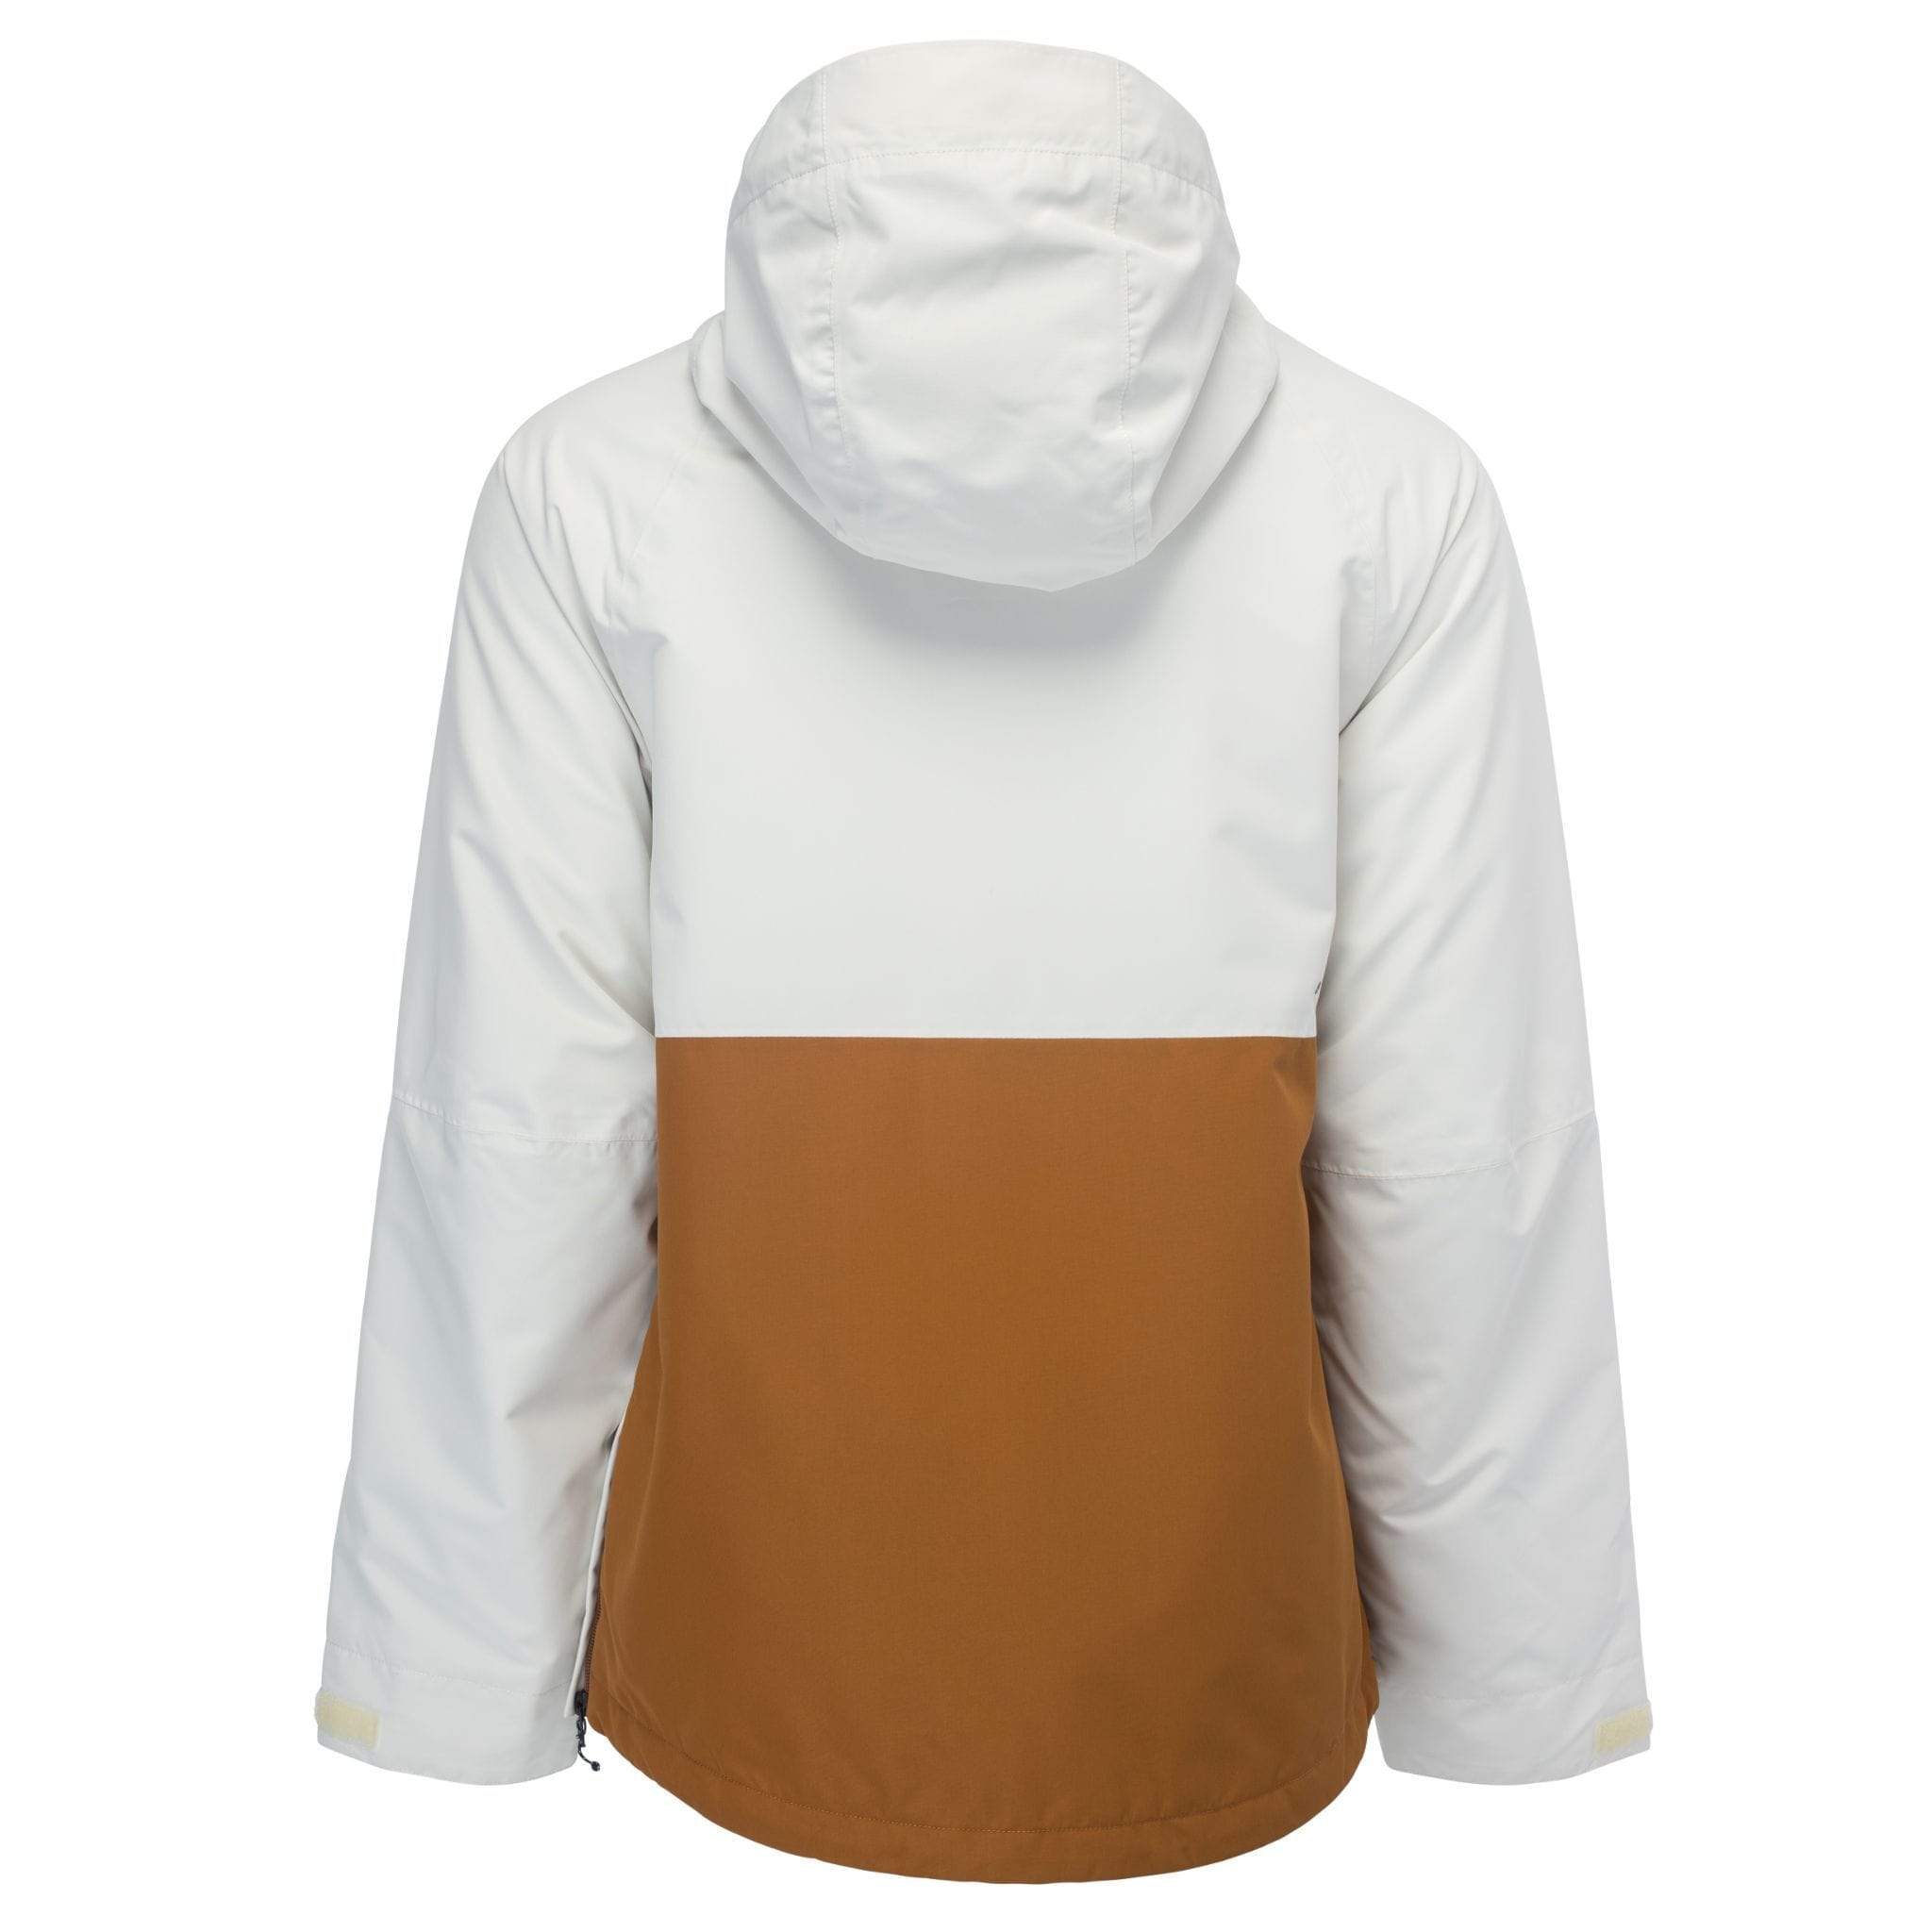 Bonfire Stack Insulated Pullover Jacket